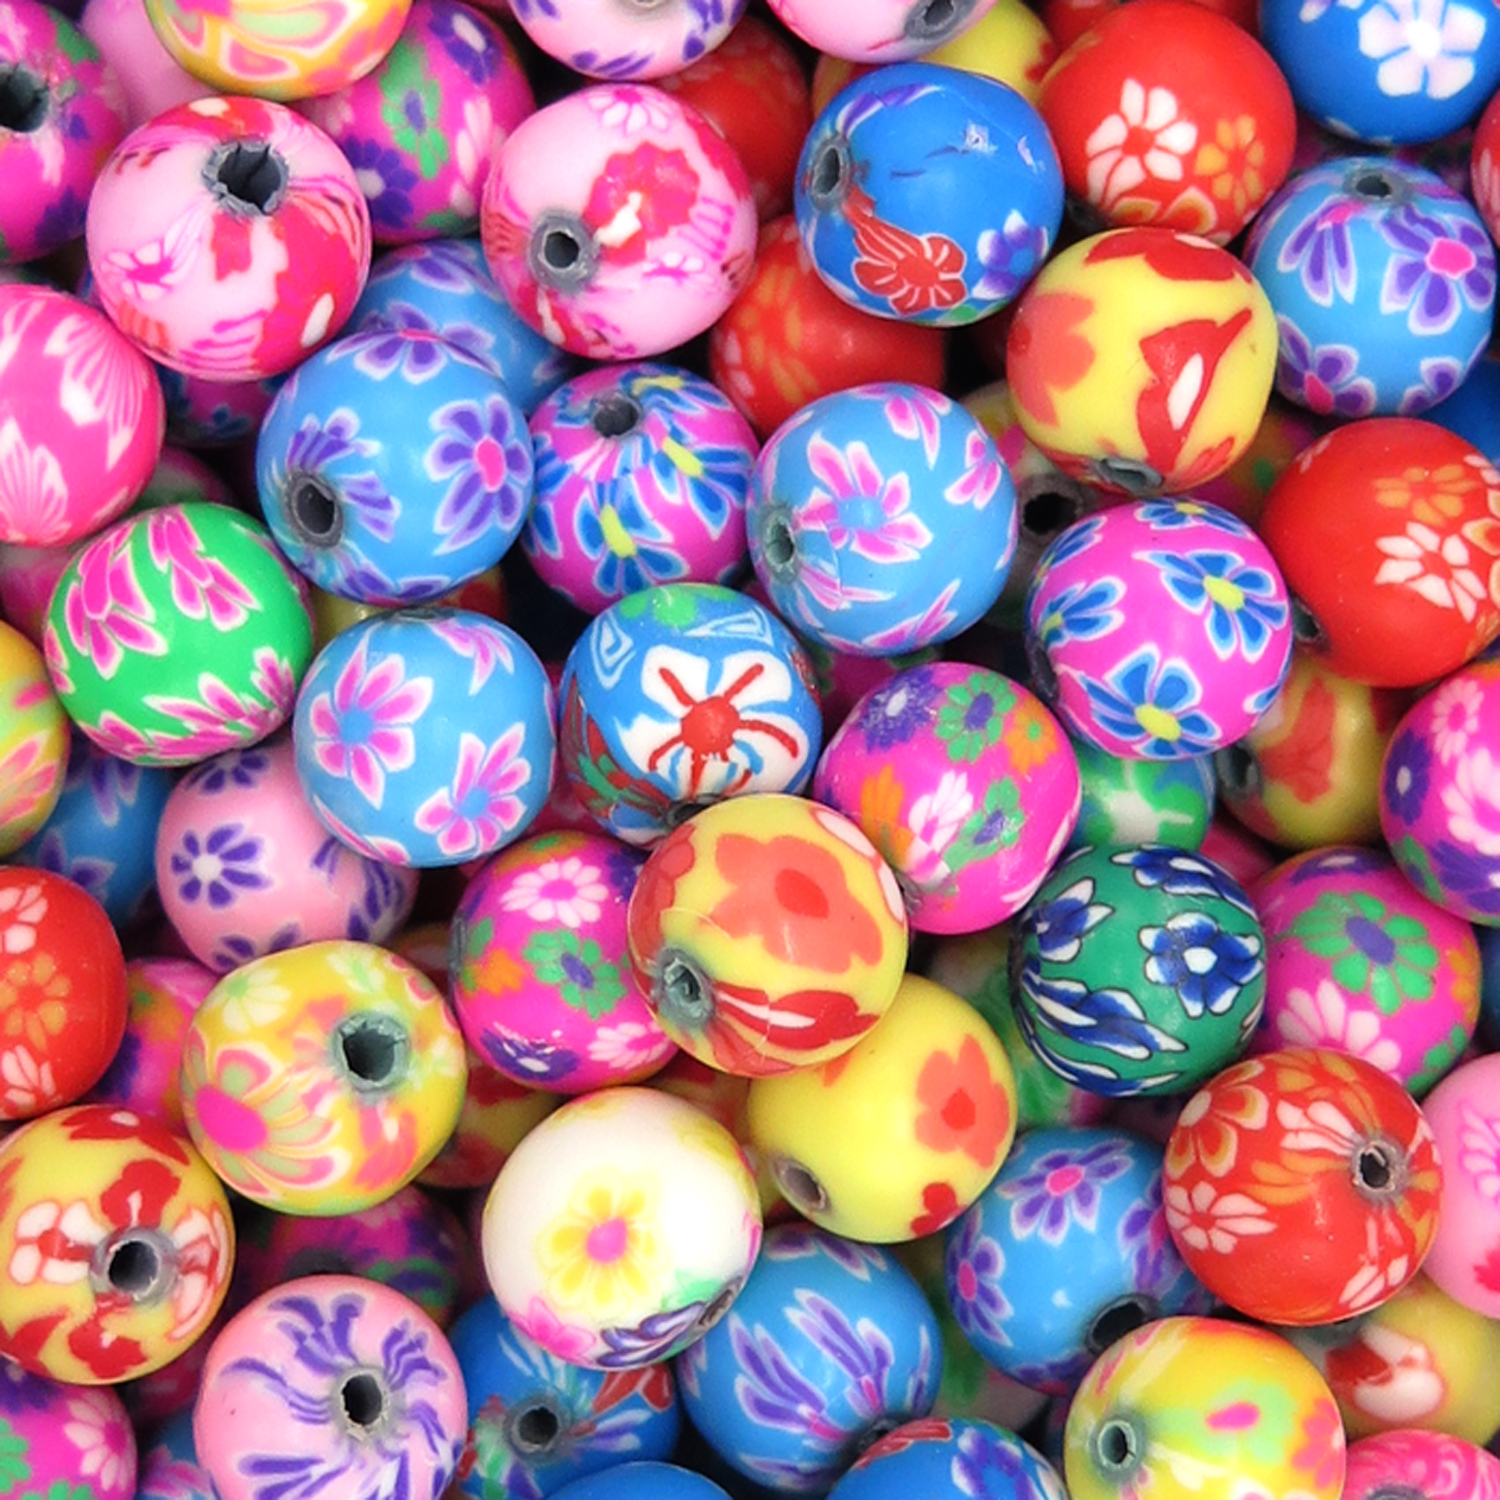 Handmade Polymer Clay Round Flower Beads ~ You Choose Size